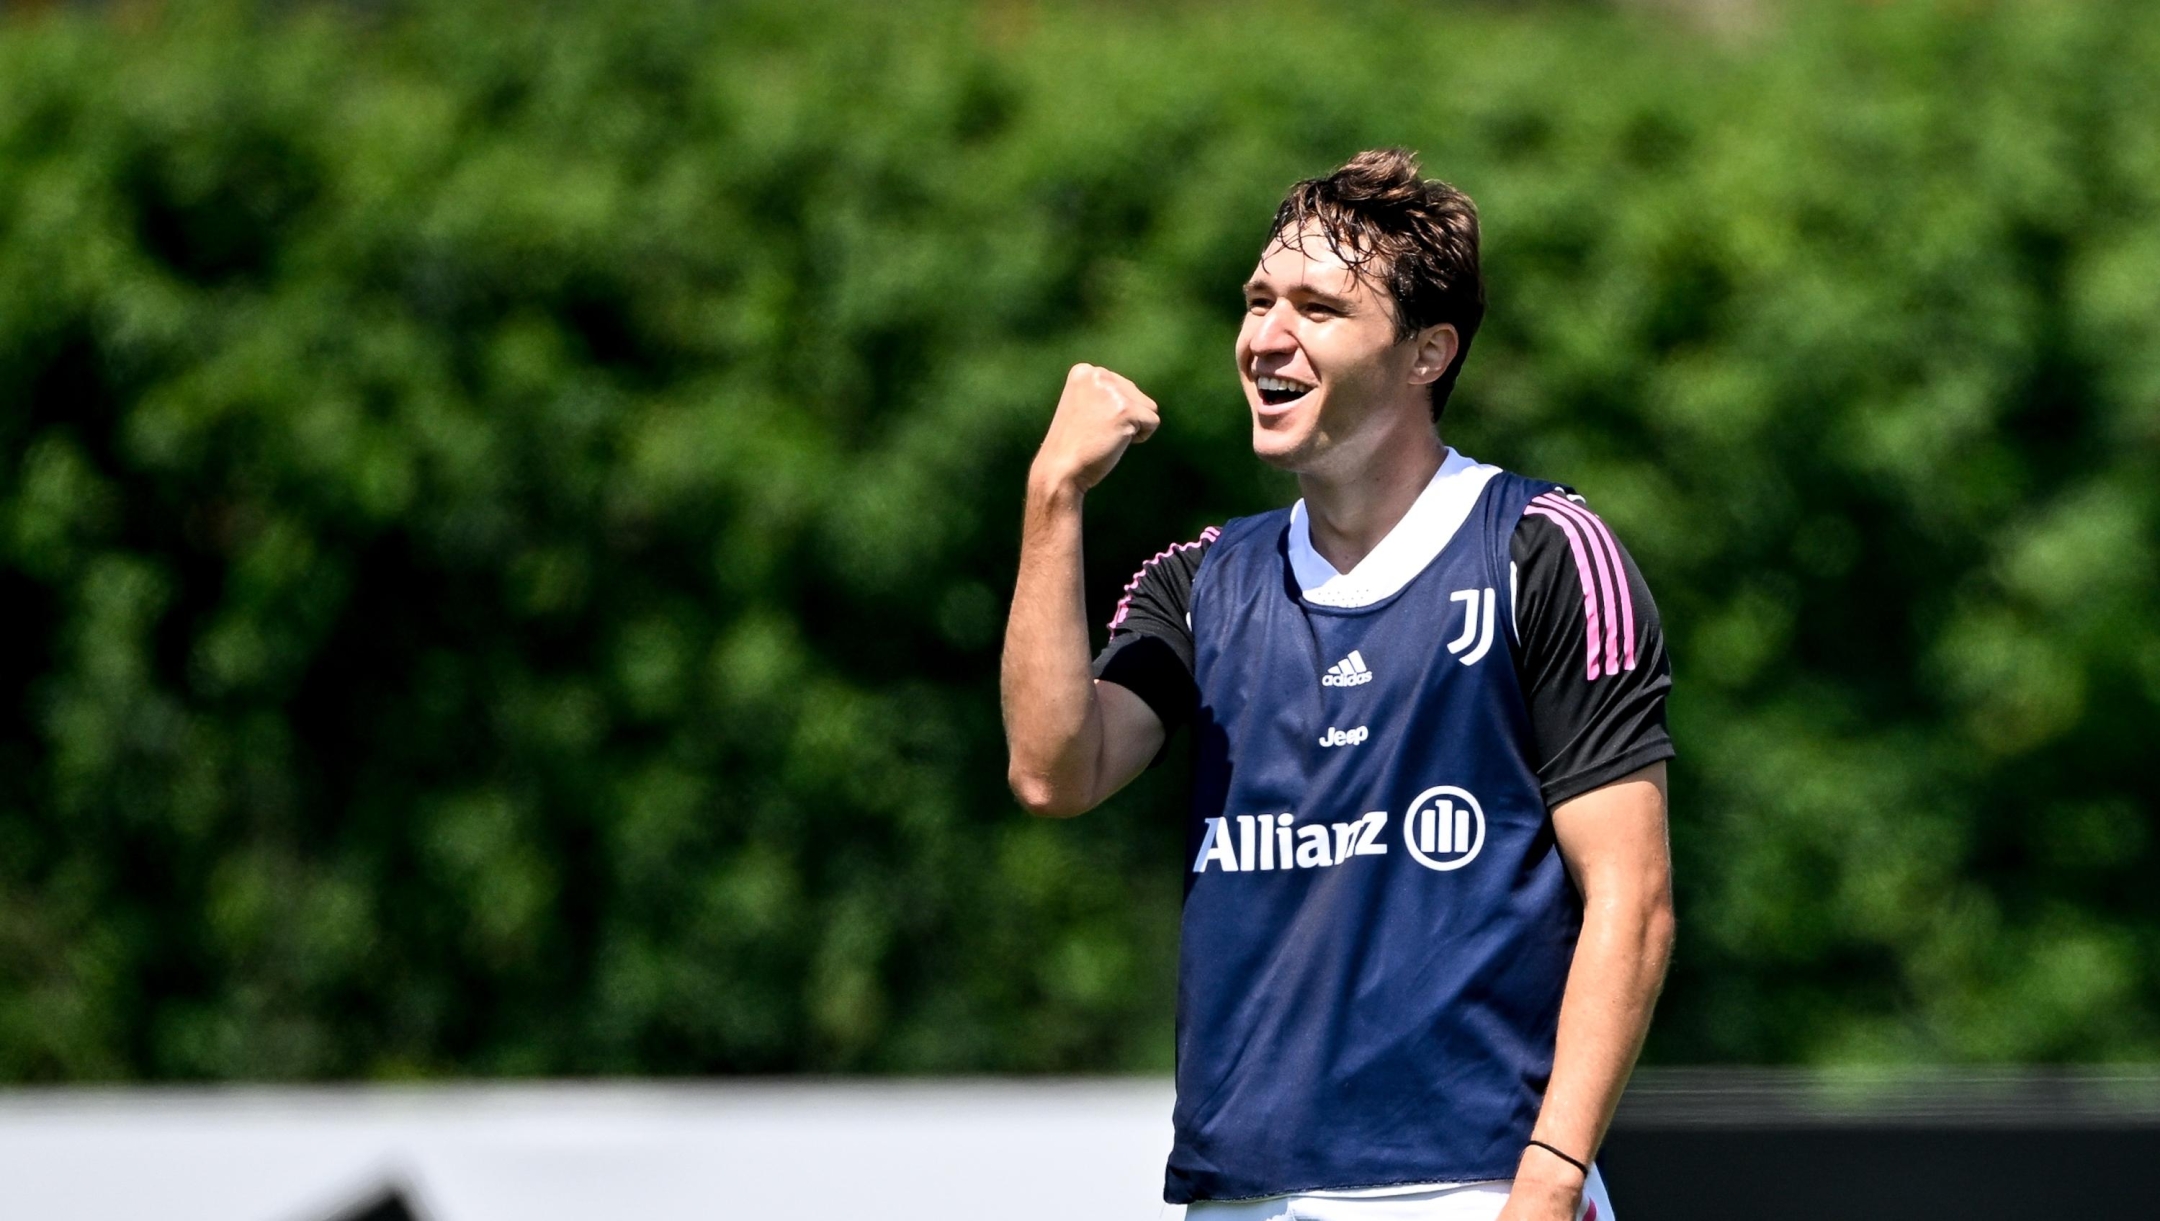 LOS ANGELES, CALIFORNIA - JULY 25: Federico Chiesa of Juventus during a training session on July 25, 2023 in Los Angeles, California. (Photo by Daniele Badolato - Juventus FC/Juventus FC via Getty Images)